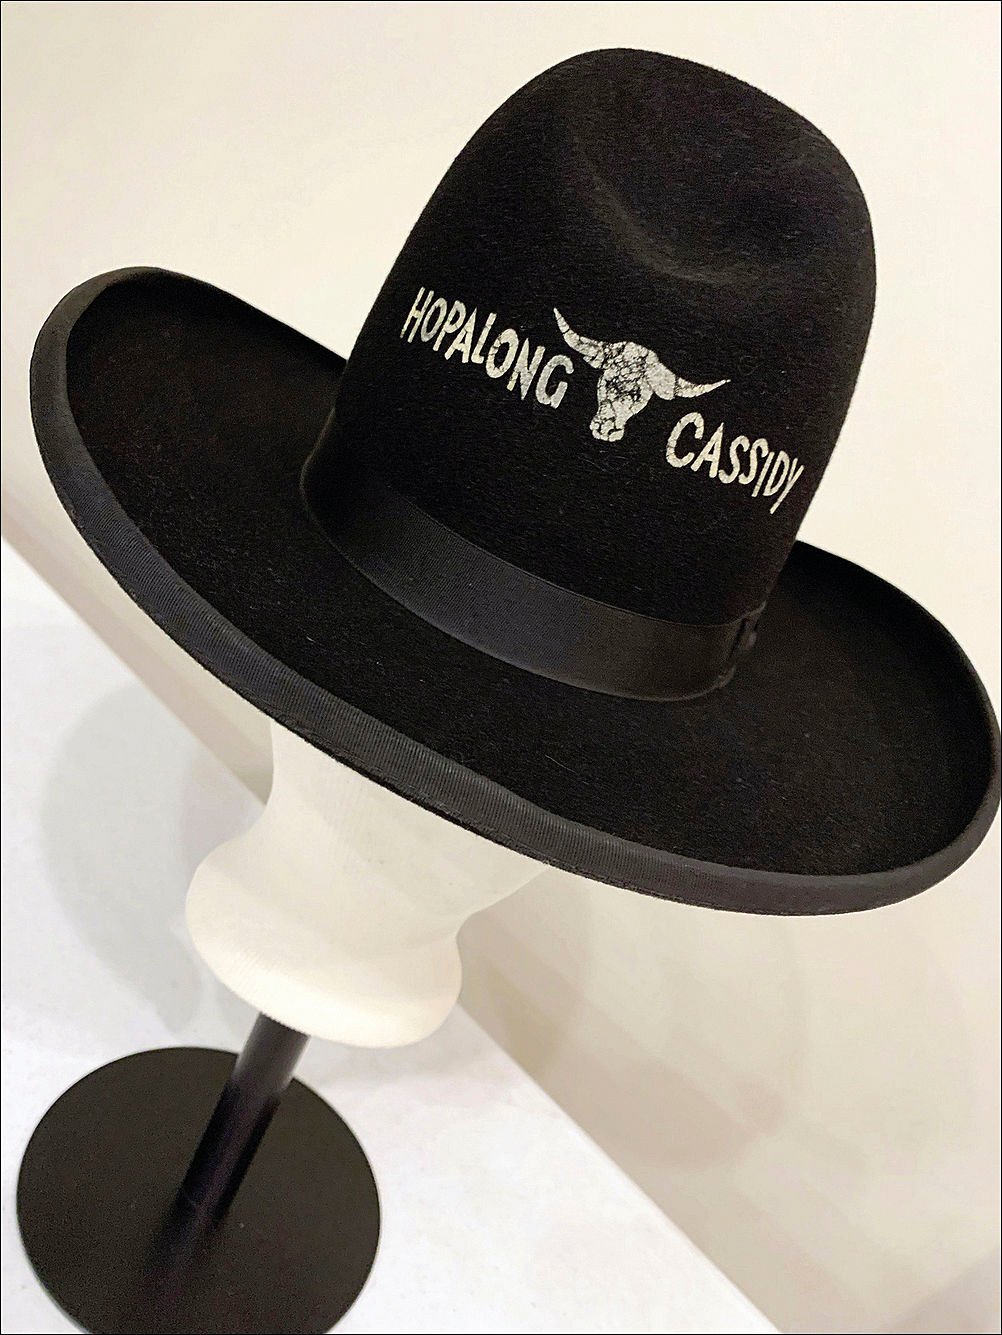 A hat with a history: Museum receives Hopalong Cassidy keepsake